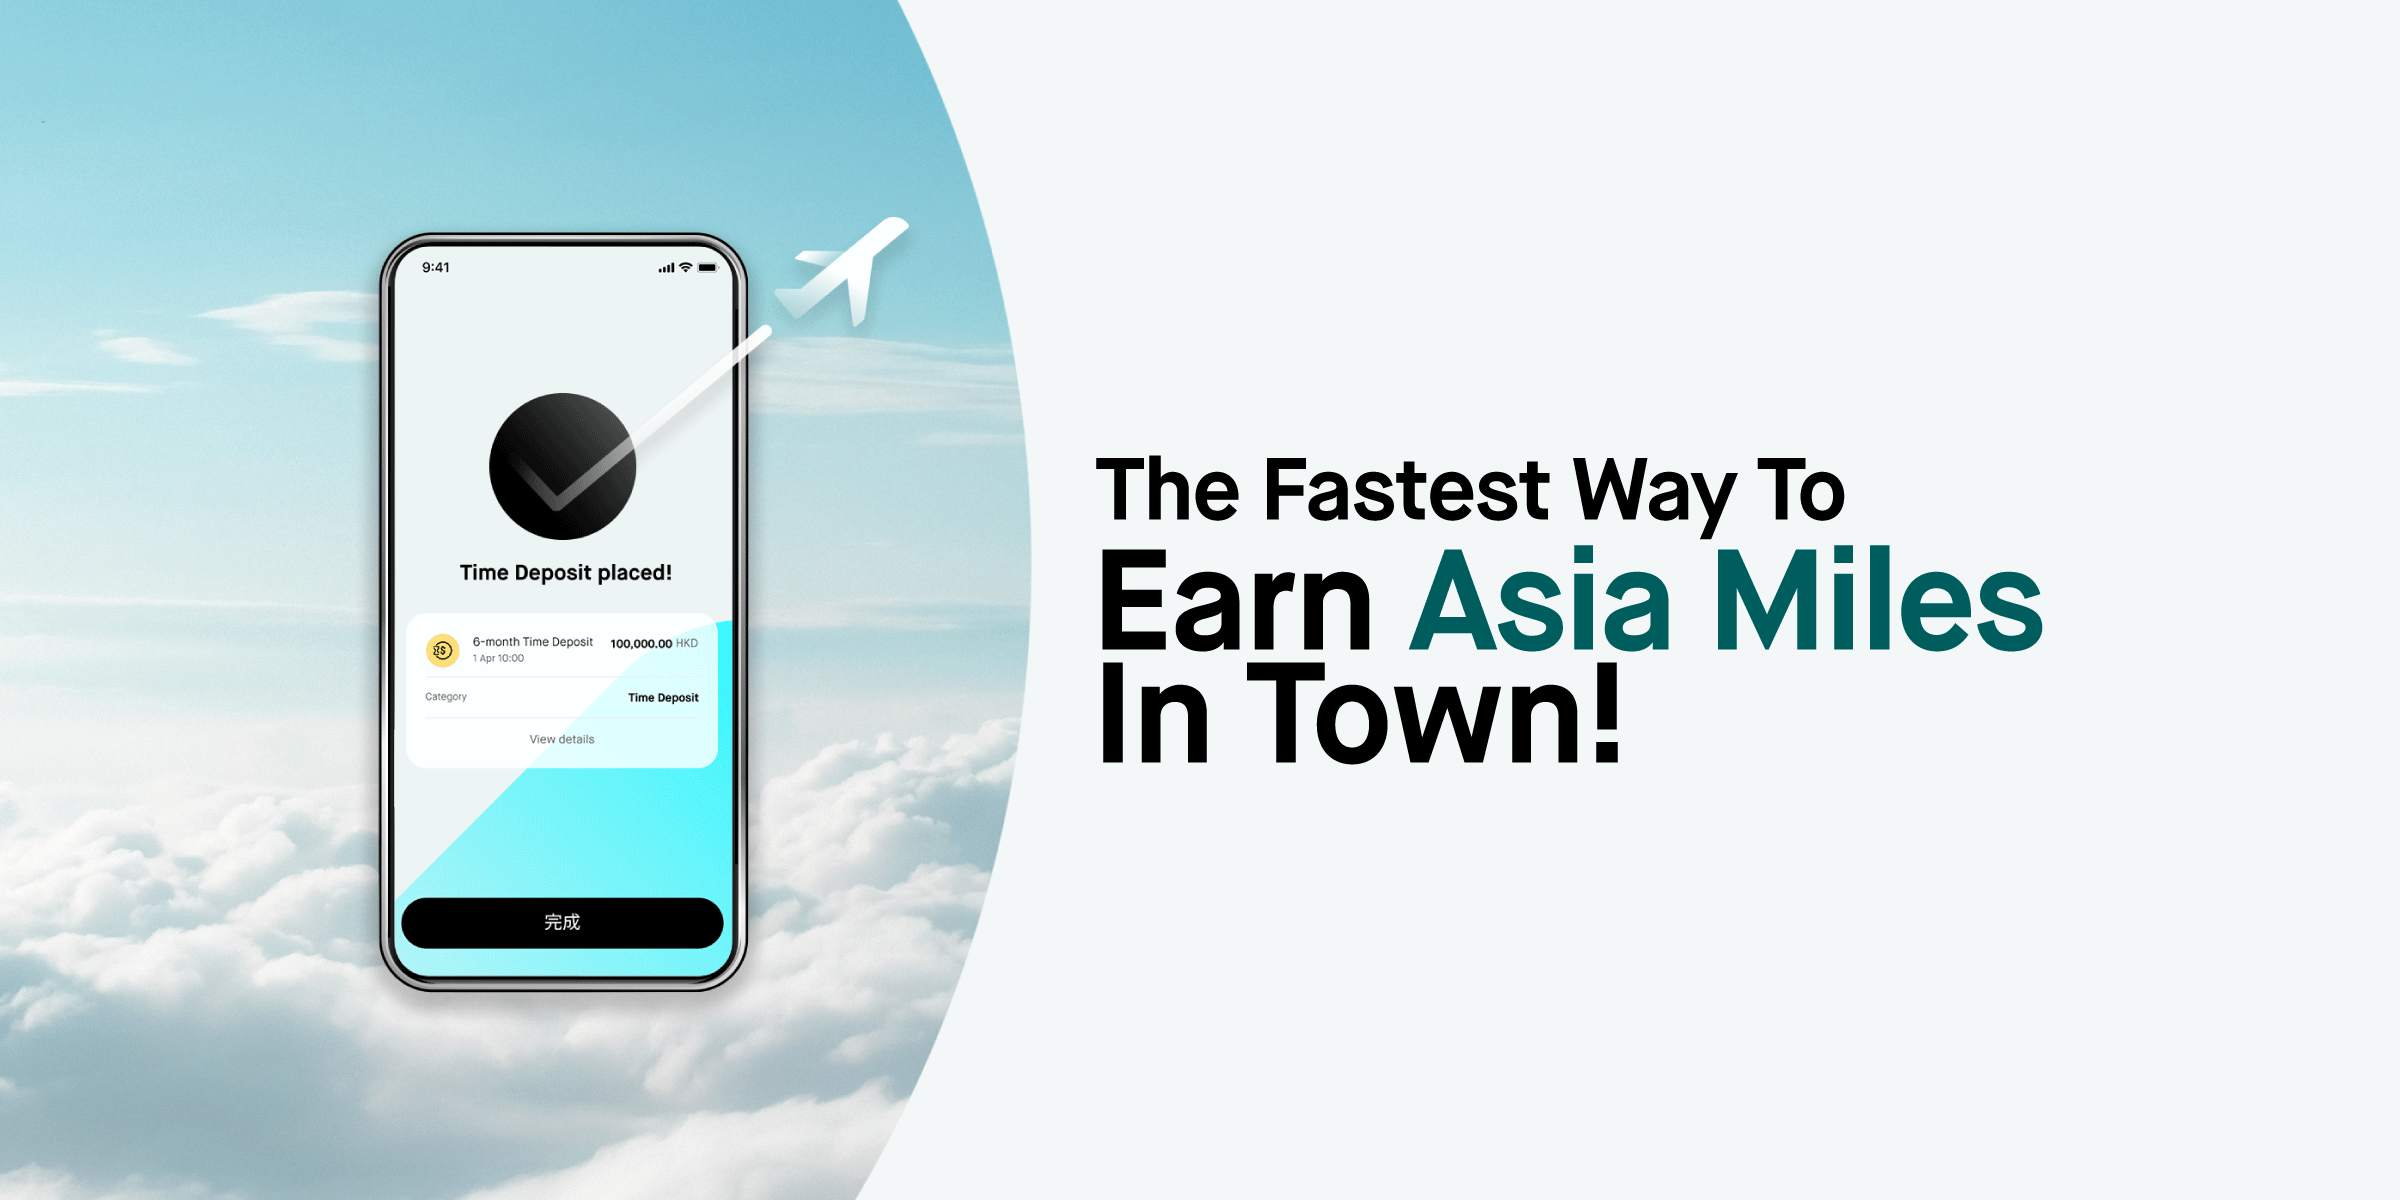 Mox Redefines Savings by Becoming the First Hong Kong Bank to Offer Instant Asia Miles with Time Deposit, Fastest Way to Earn Miles 